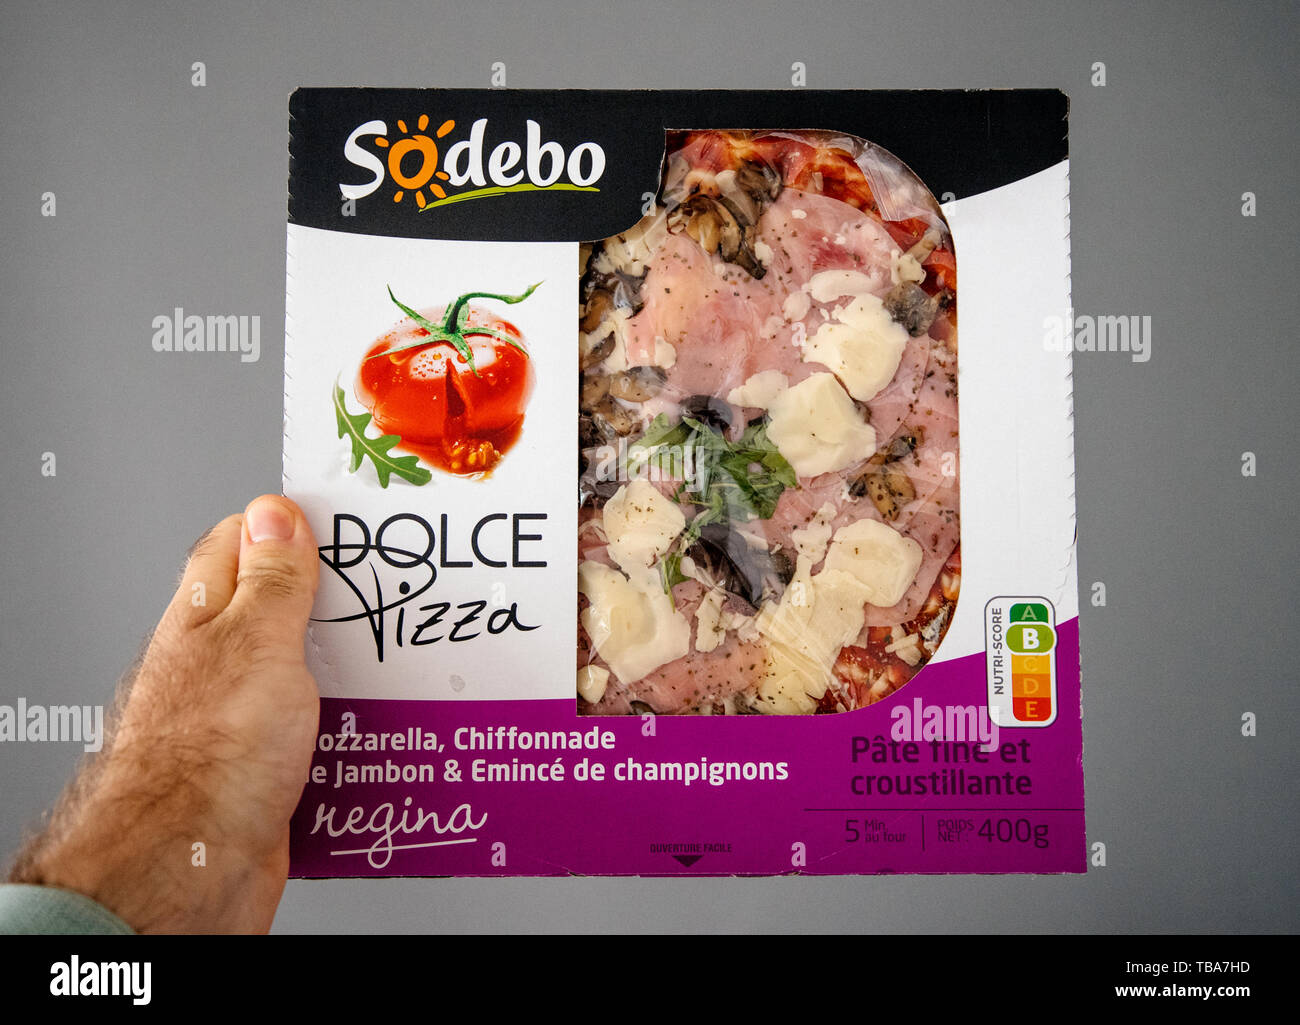 Strasbourg, France - May 27, 2019: Man hand holding against gray background a box with pre-frozen pizza made by French company Sodebo Dolce Pizza REgina Stock Photo